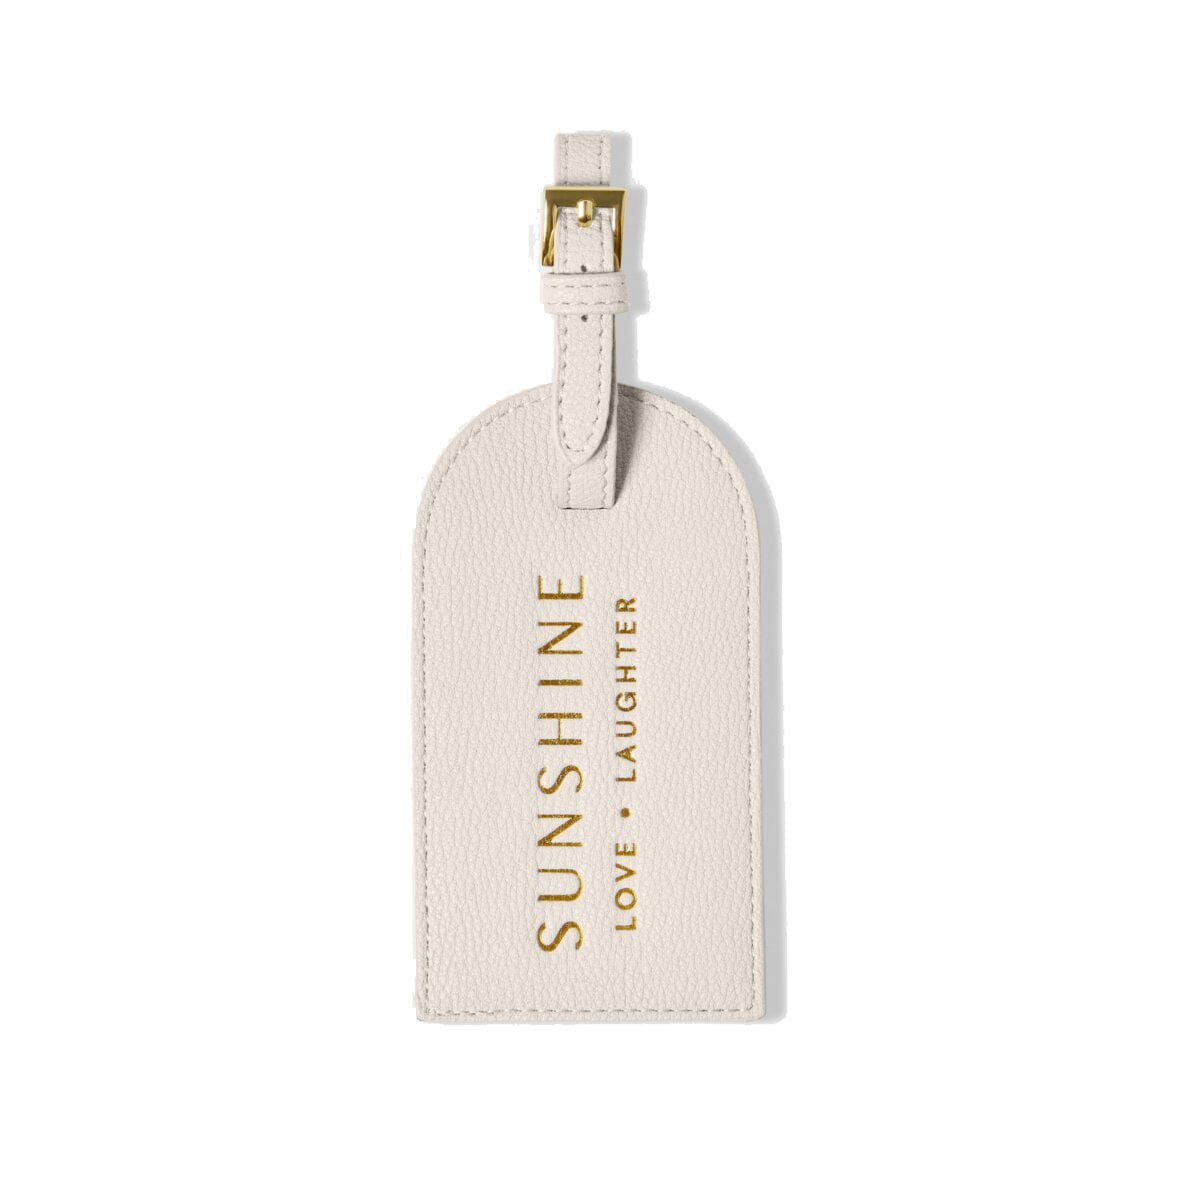 Katie Loxton Travel Accessories Off-White Katie Loxton Sentiment Luggage Tag - Off-White/Light Taupe/Black